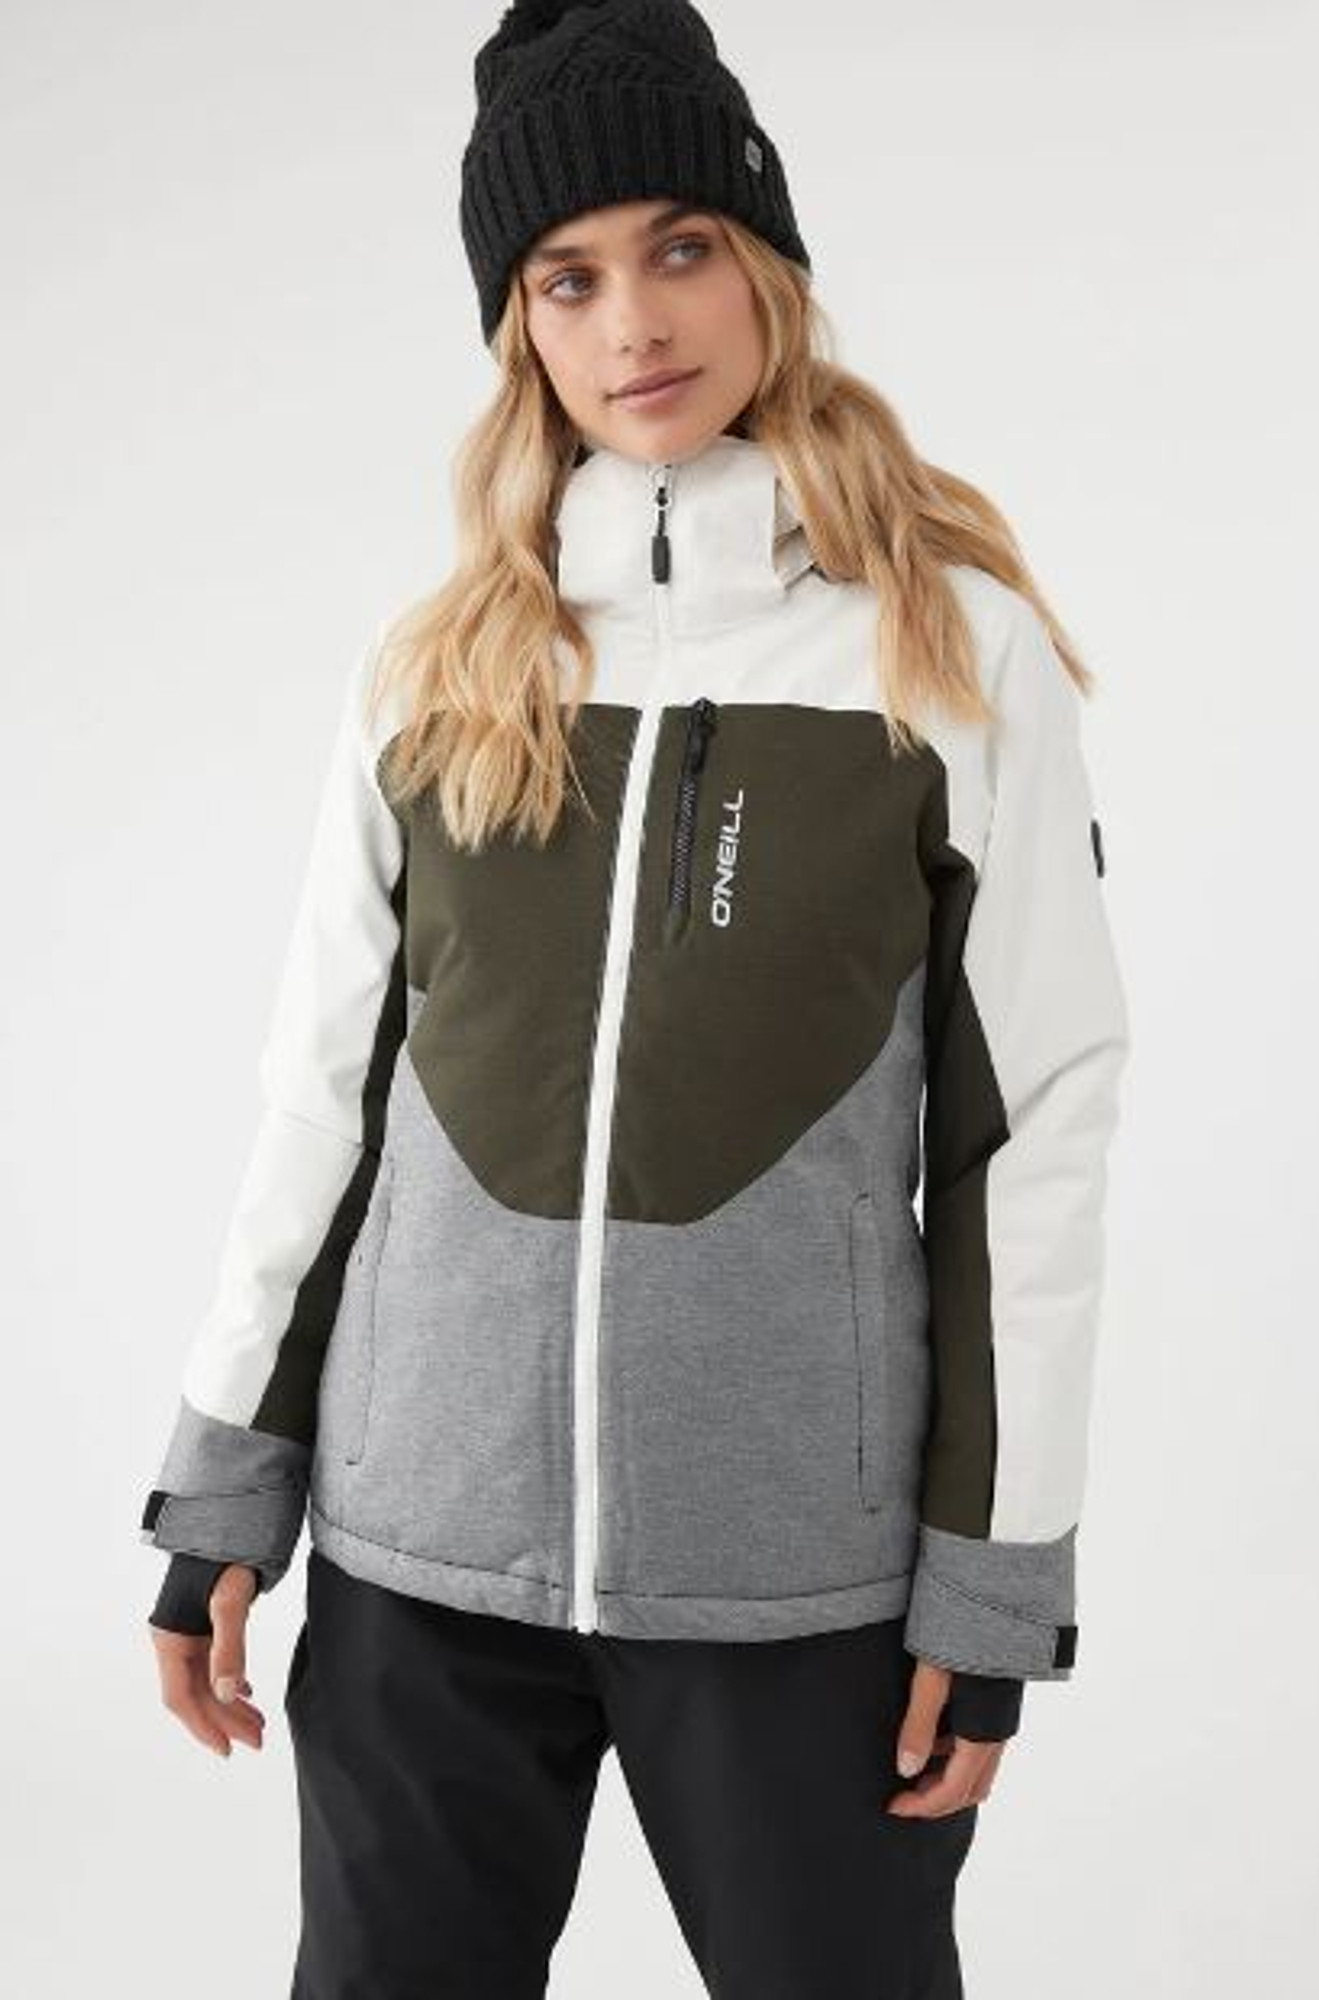 Bluetooth MP3 Snowboarding Jacket from O'Neill